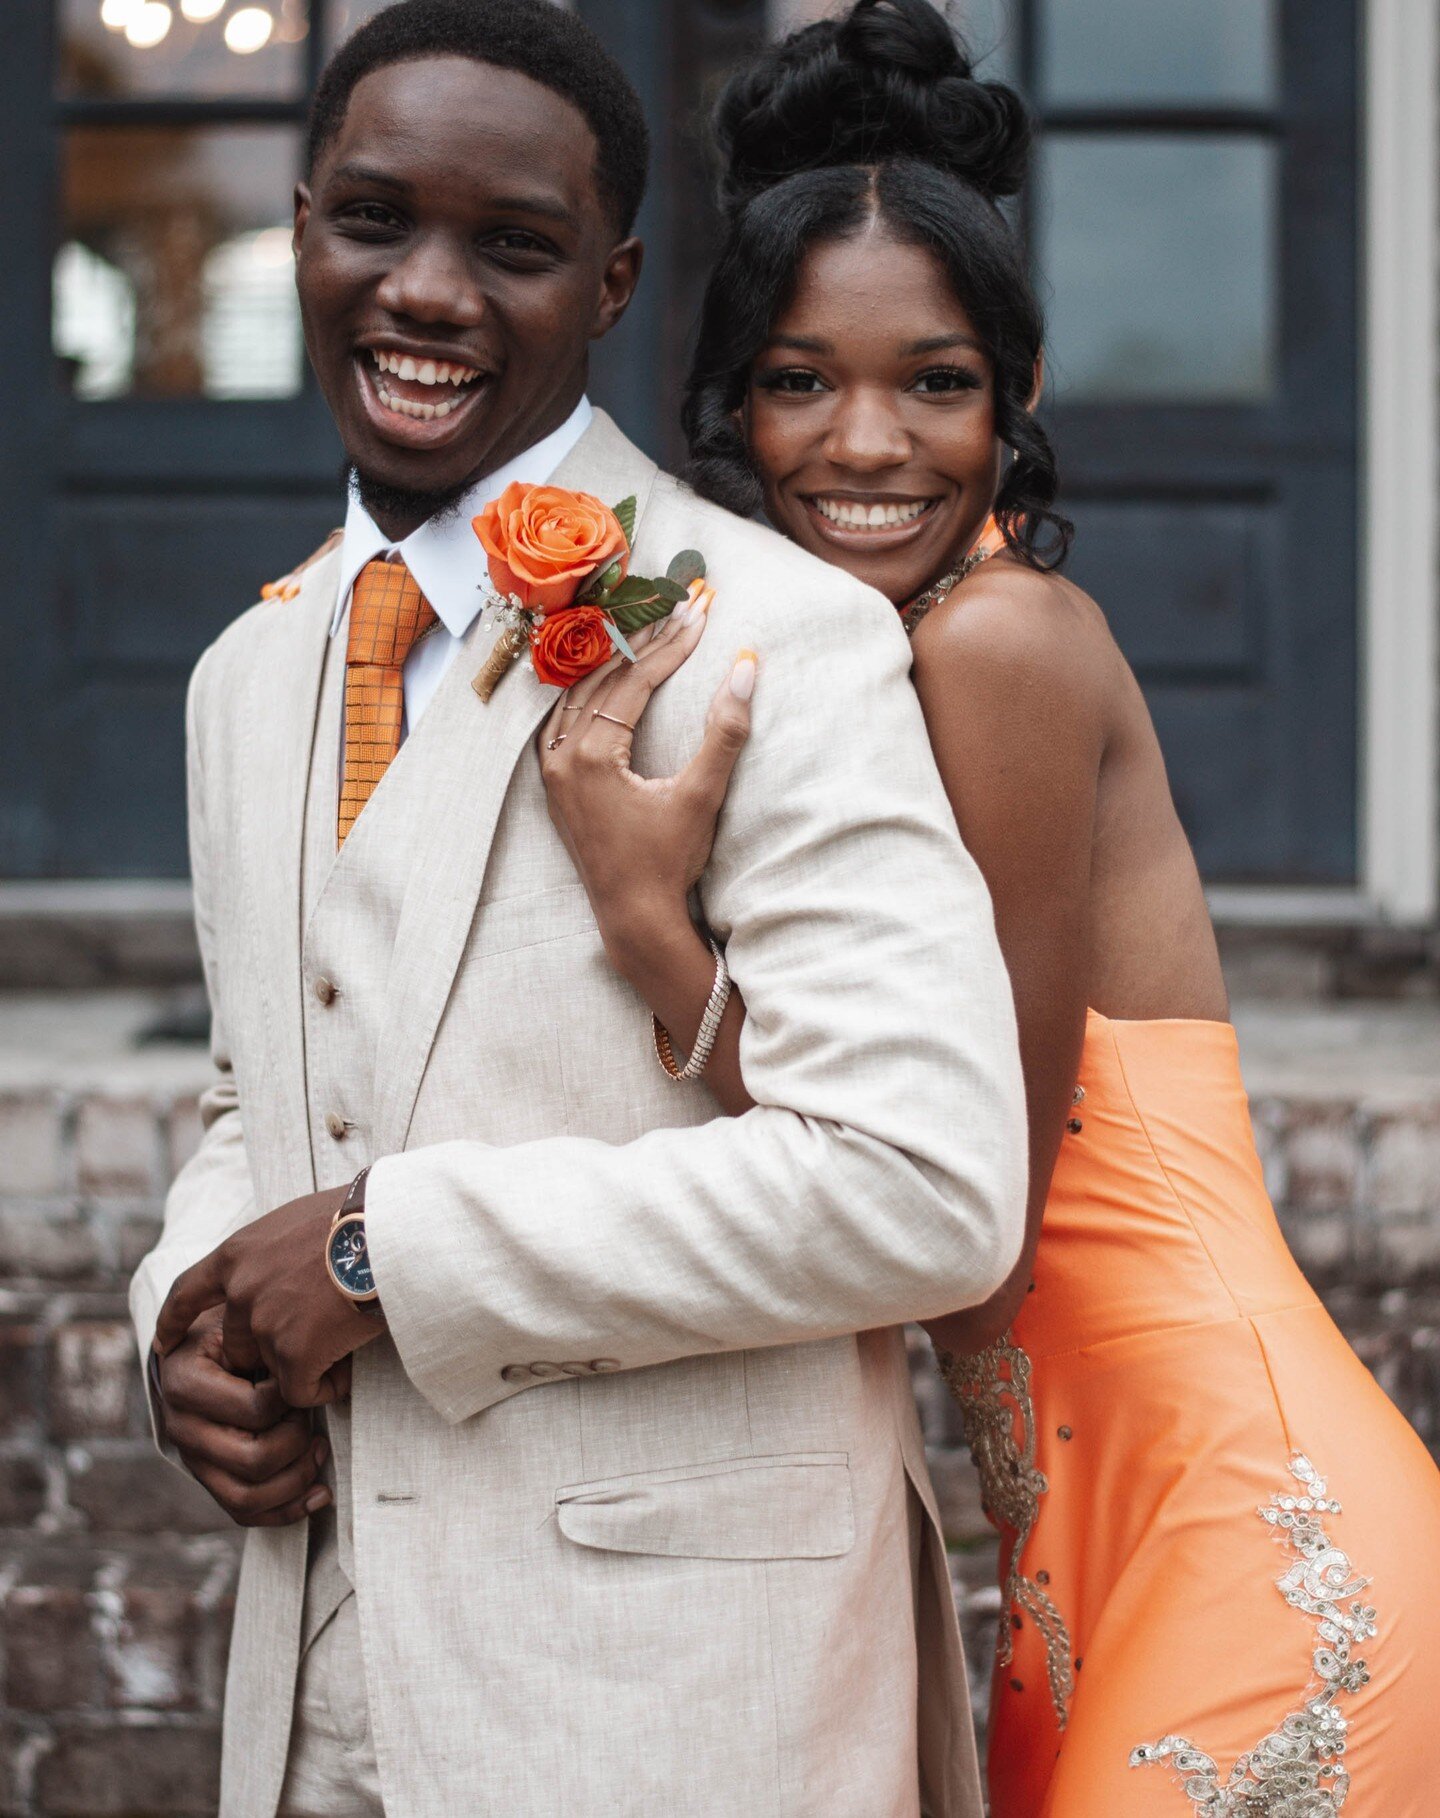 PROM 2023 season is starting off fantastic! This sweet couple allowed me to take their prom photos last Friday, and I couldn't be happier with how they come out - especially with the storm clouds looming over.